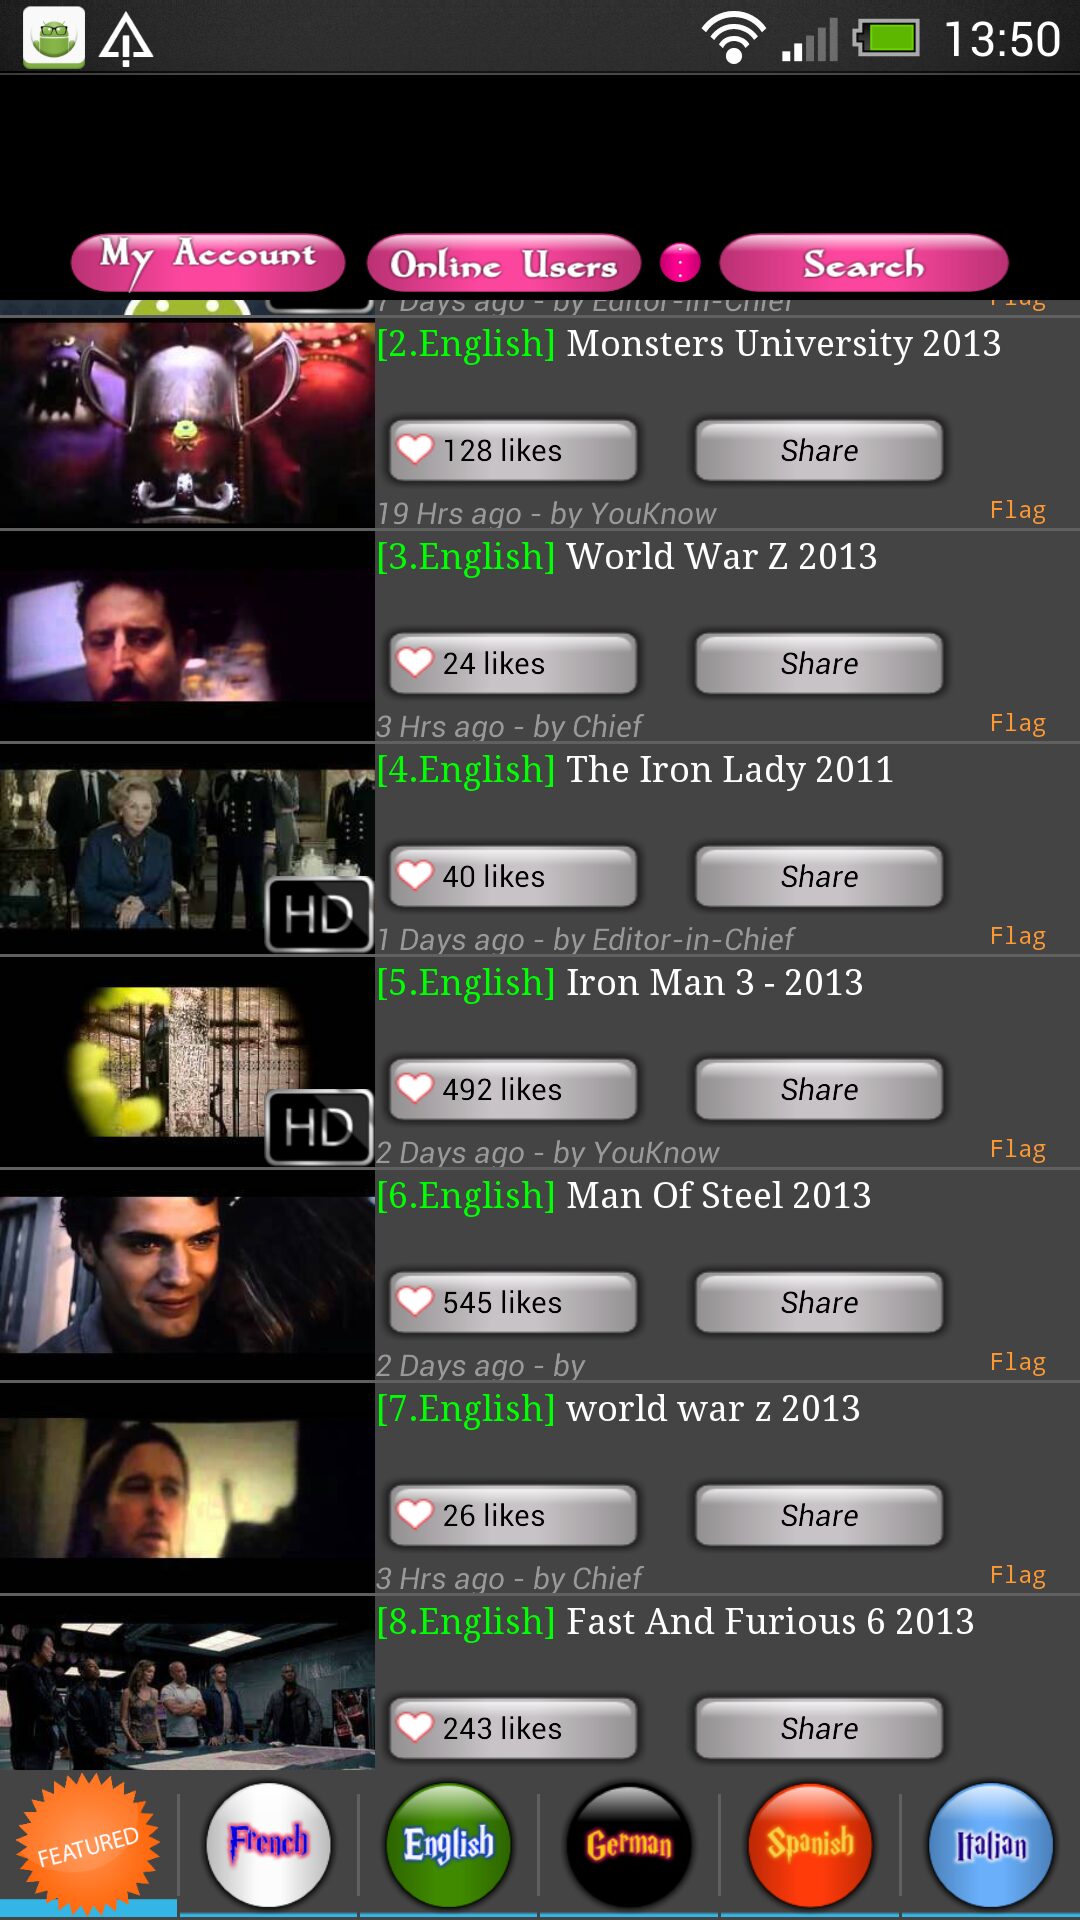 movietube film entier youtube gratuit android